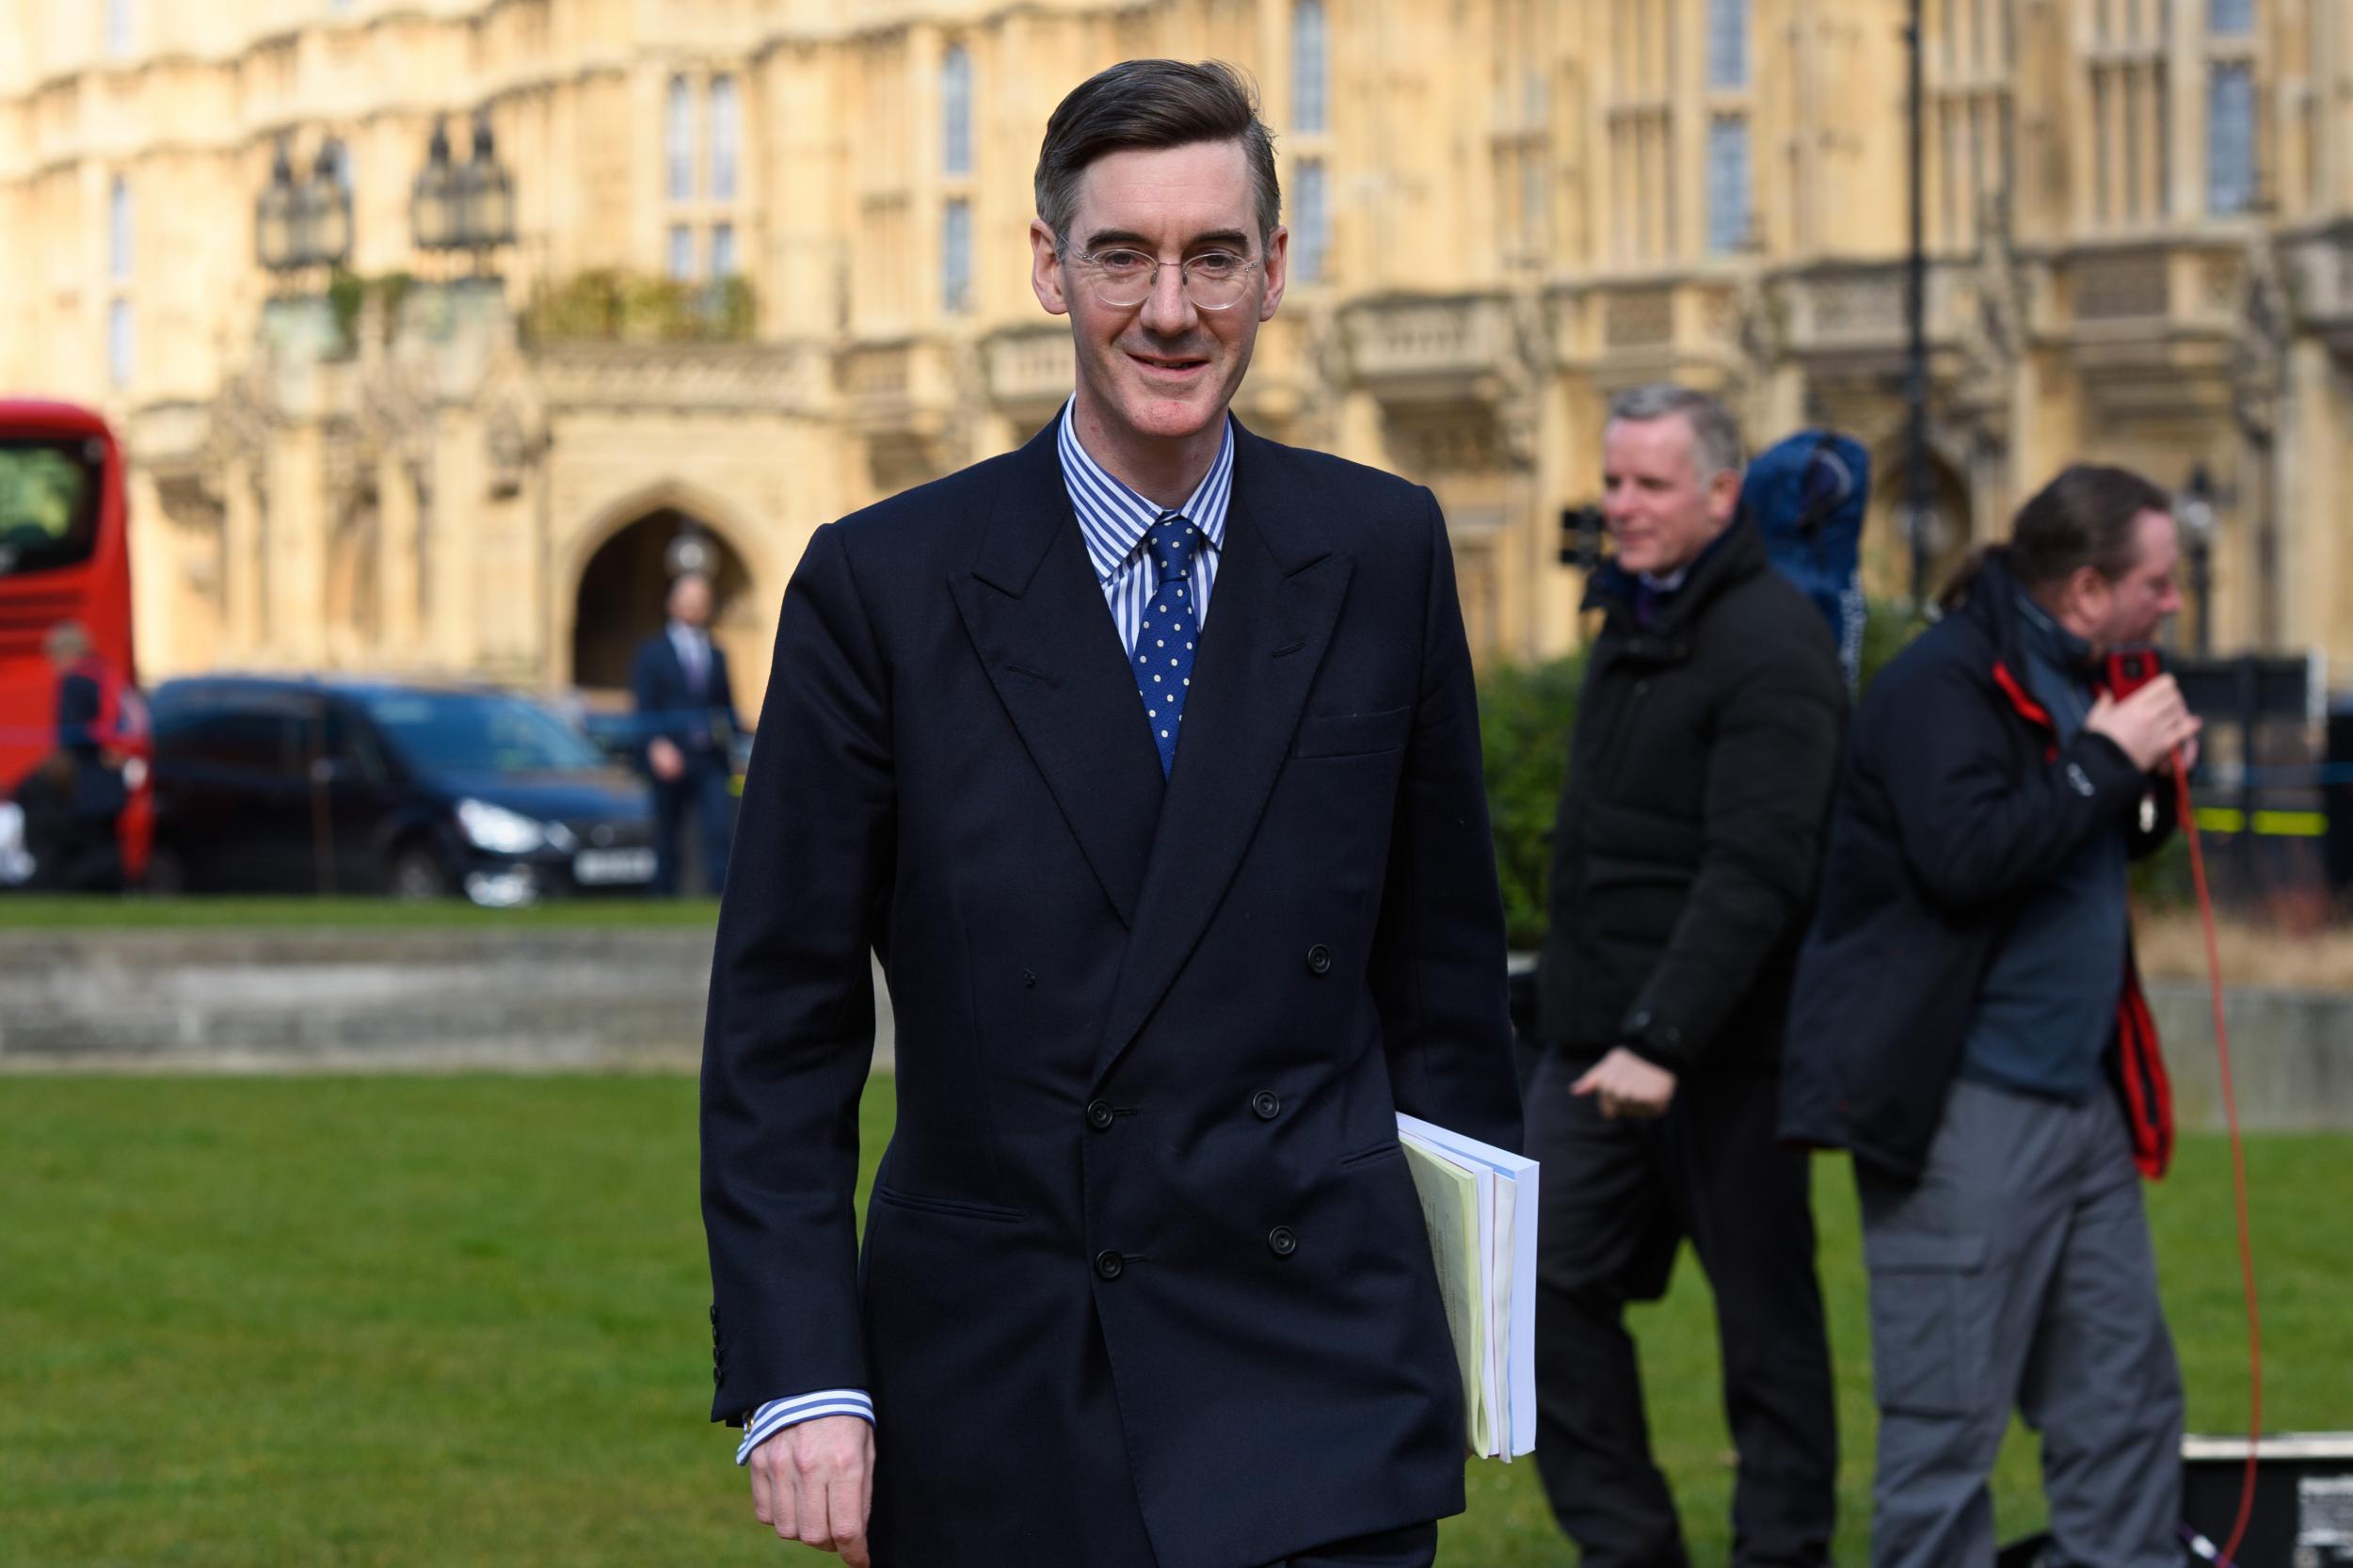 Mr Rees-Mogg has been touted as a replacement for Theresa May